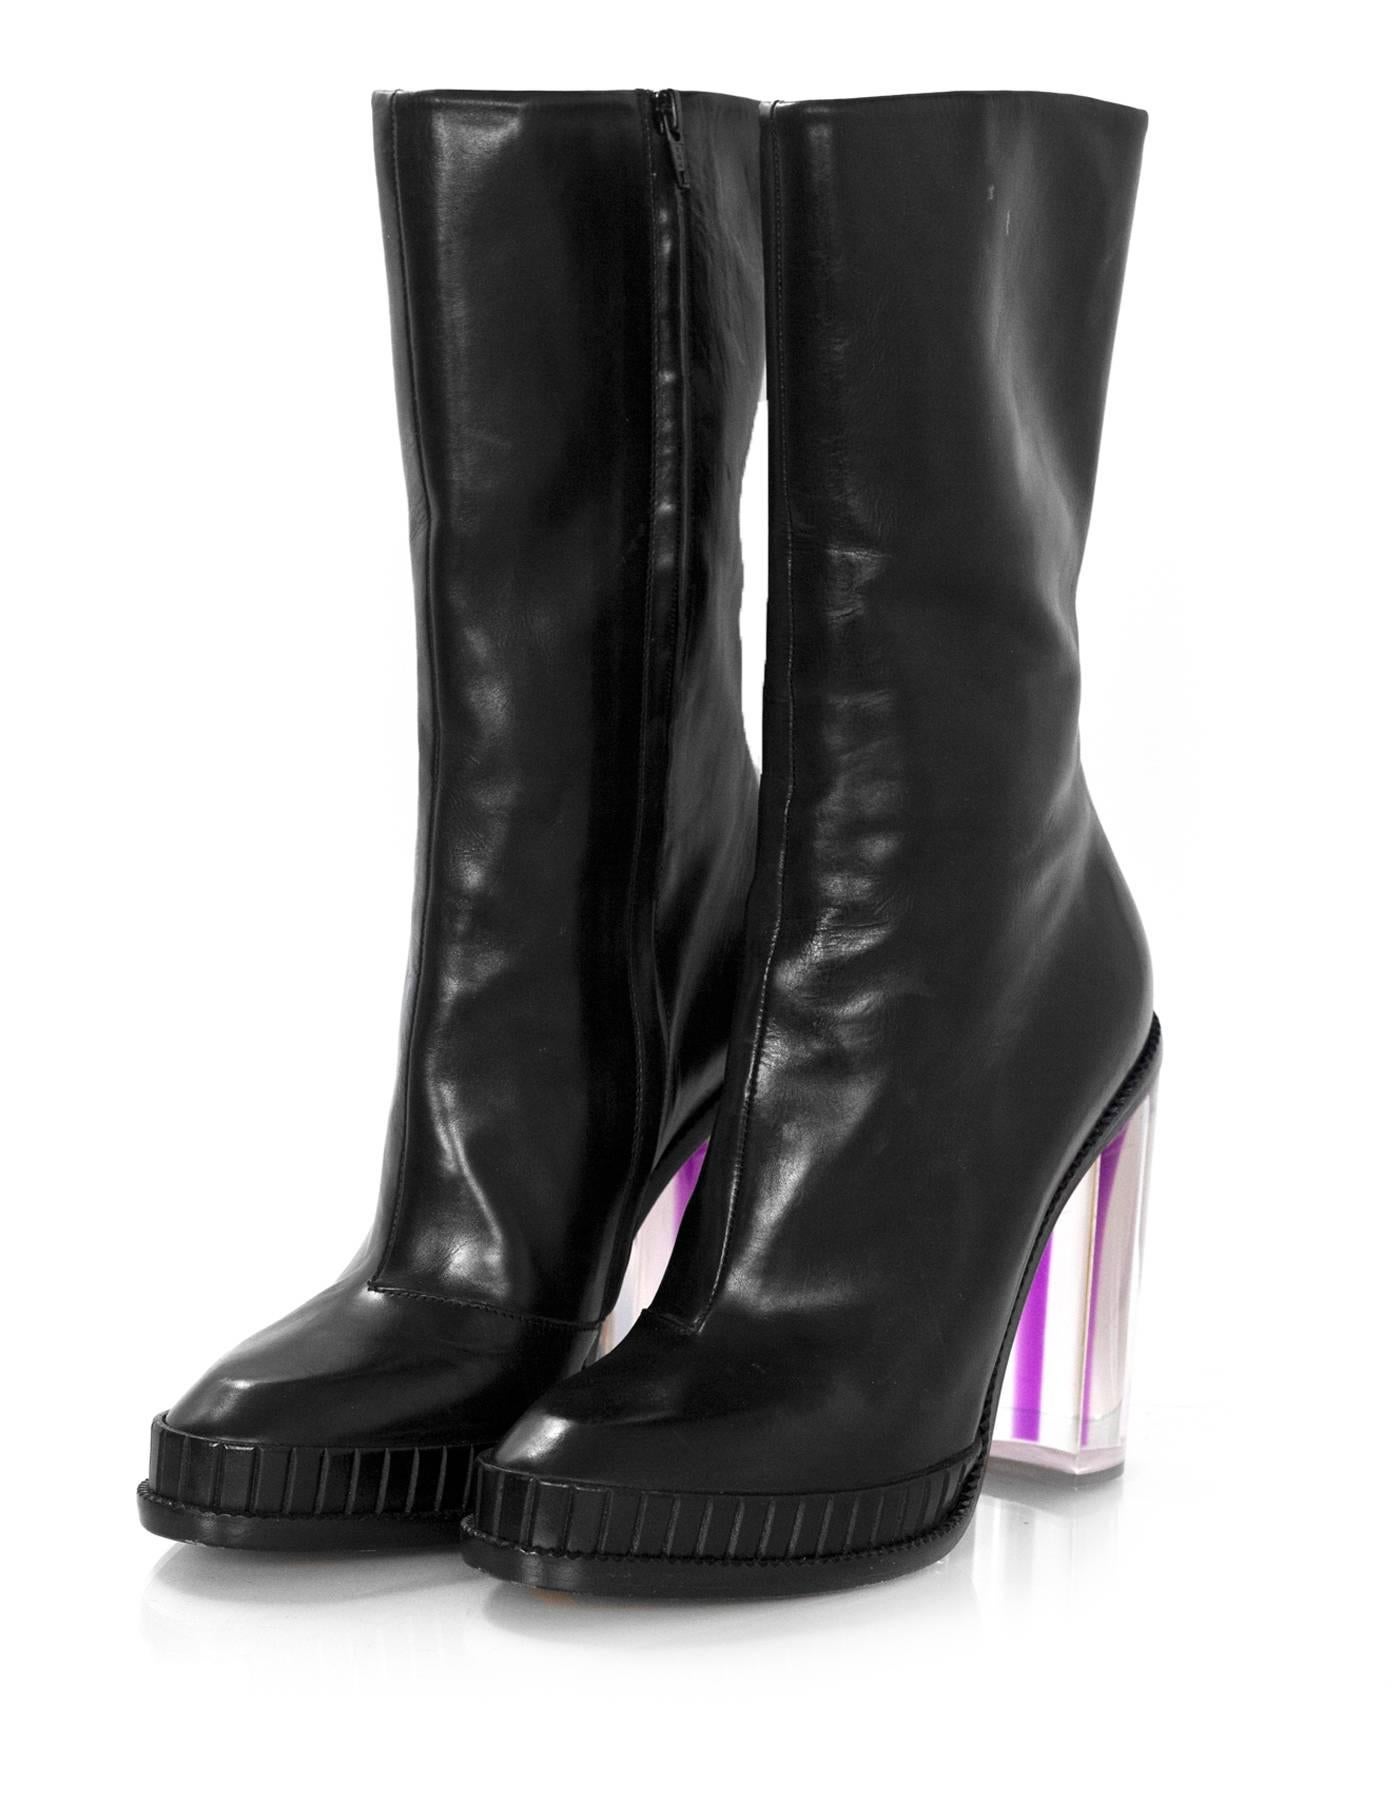 Maison Martin Margiela Black Leather & Shaded Plexiglass Boots Sz 39 In Excellent Condition In New York, NY